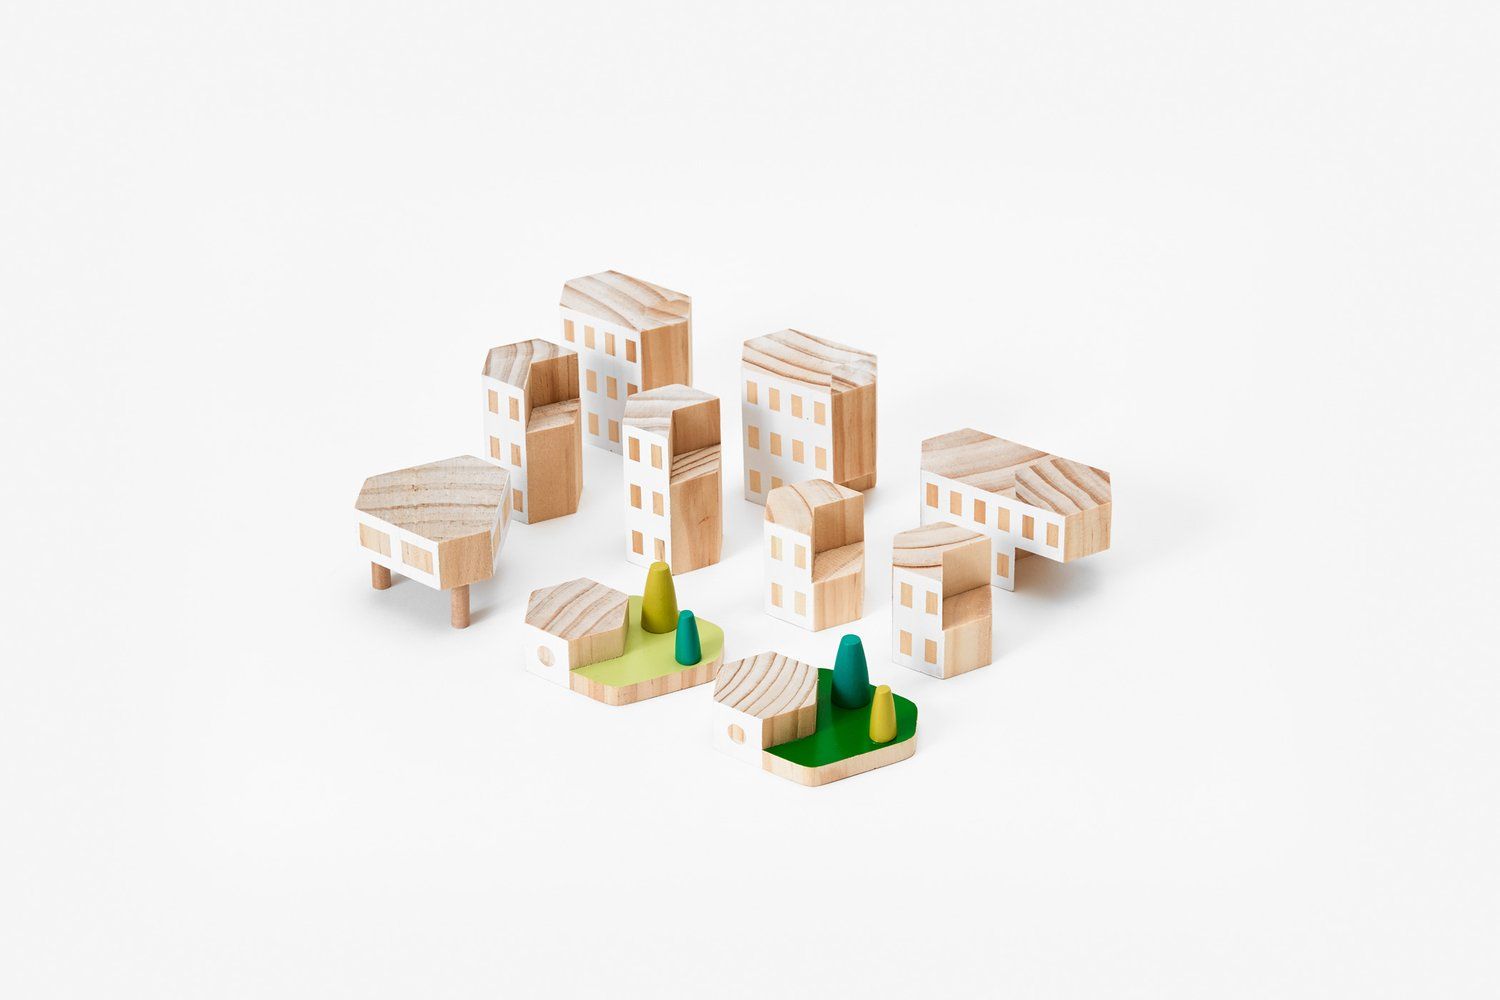 9 gift ideas for architecture enthusiasts - The Spaces